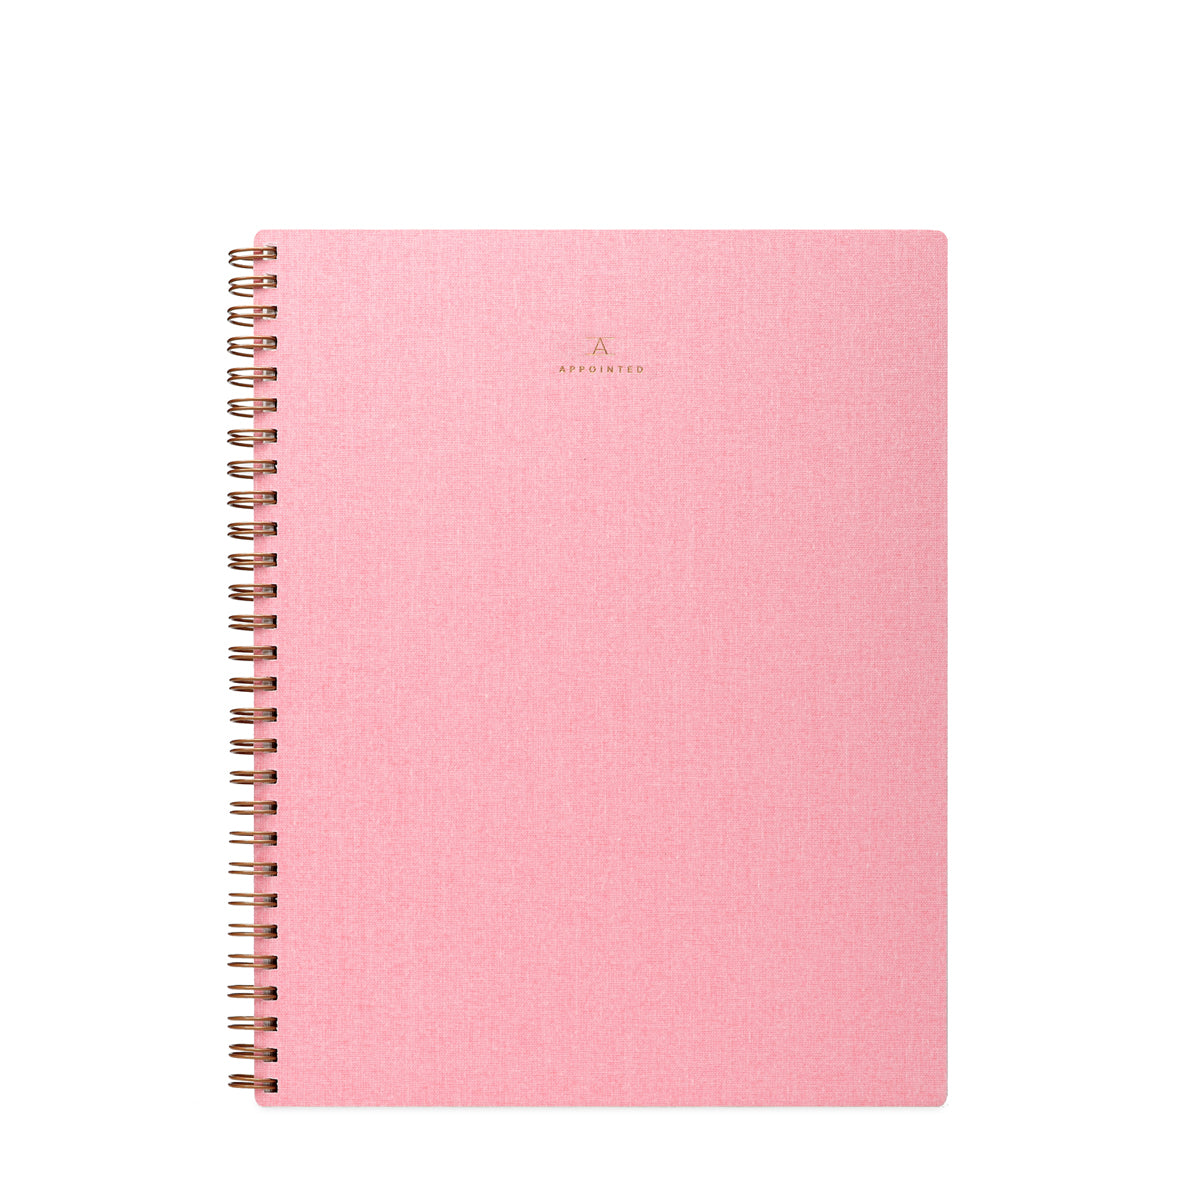 APPOINTED - NOTEBOOK - BLOSSOM PINK - LINED